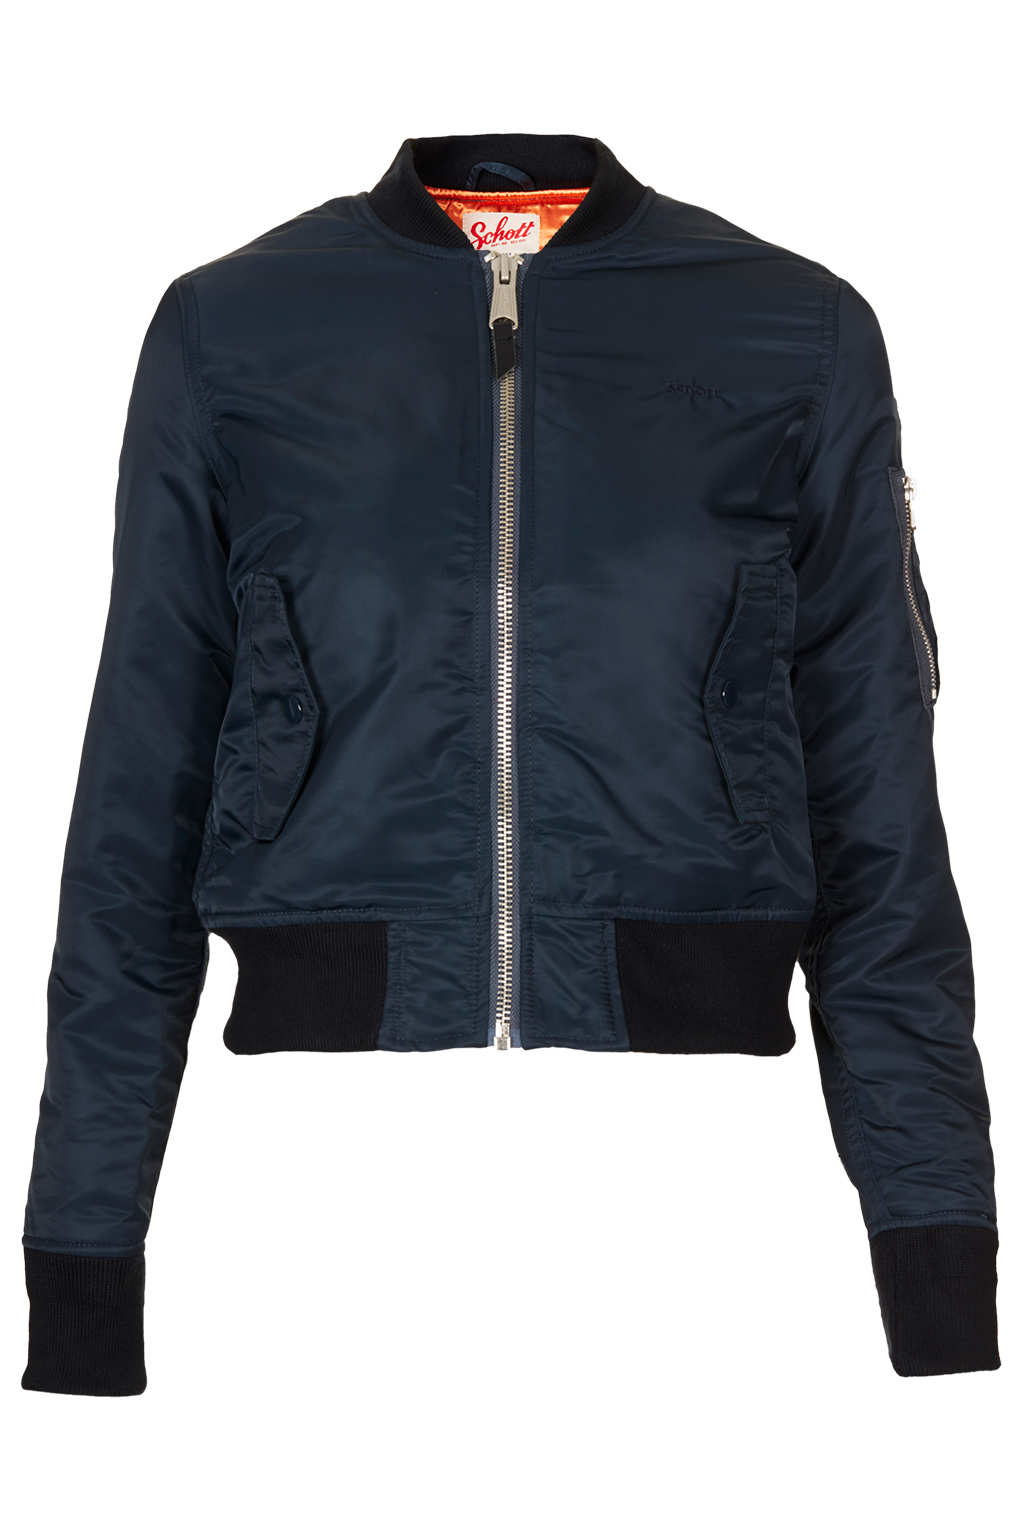 TOPSHOP Bomber Jacket By Schott Nyc in Navy Blue (Blue) - Lyst